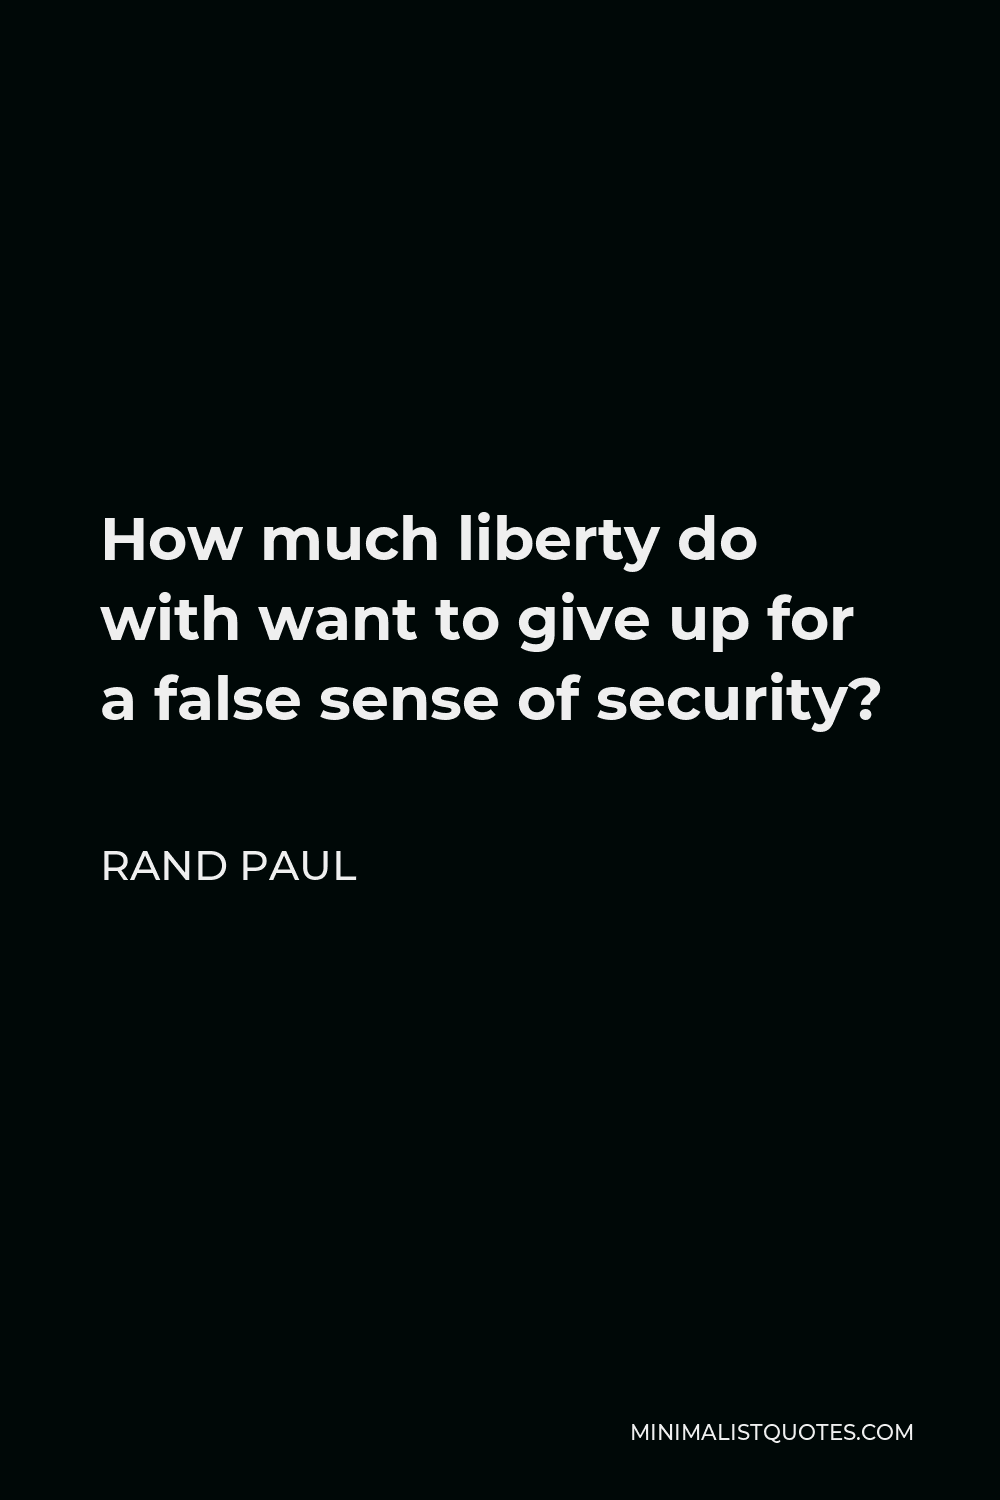 Rand Paul Quote - How much liberty do with want to give up for a false sense of security?